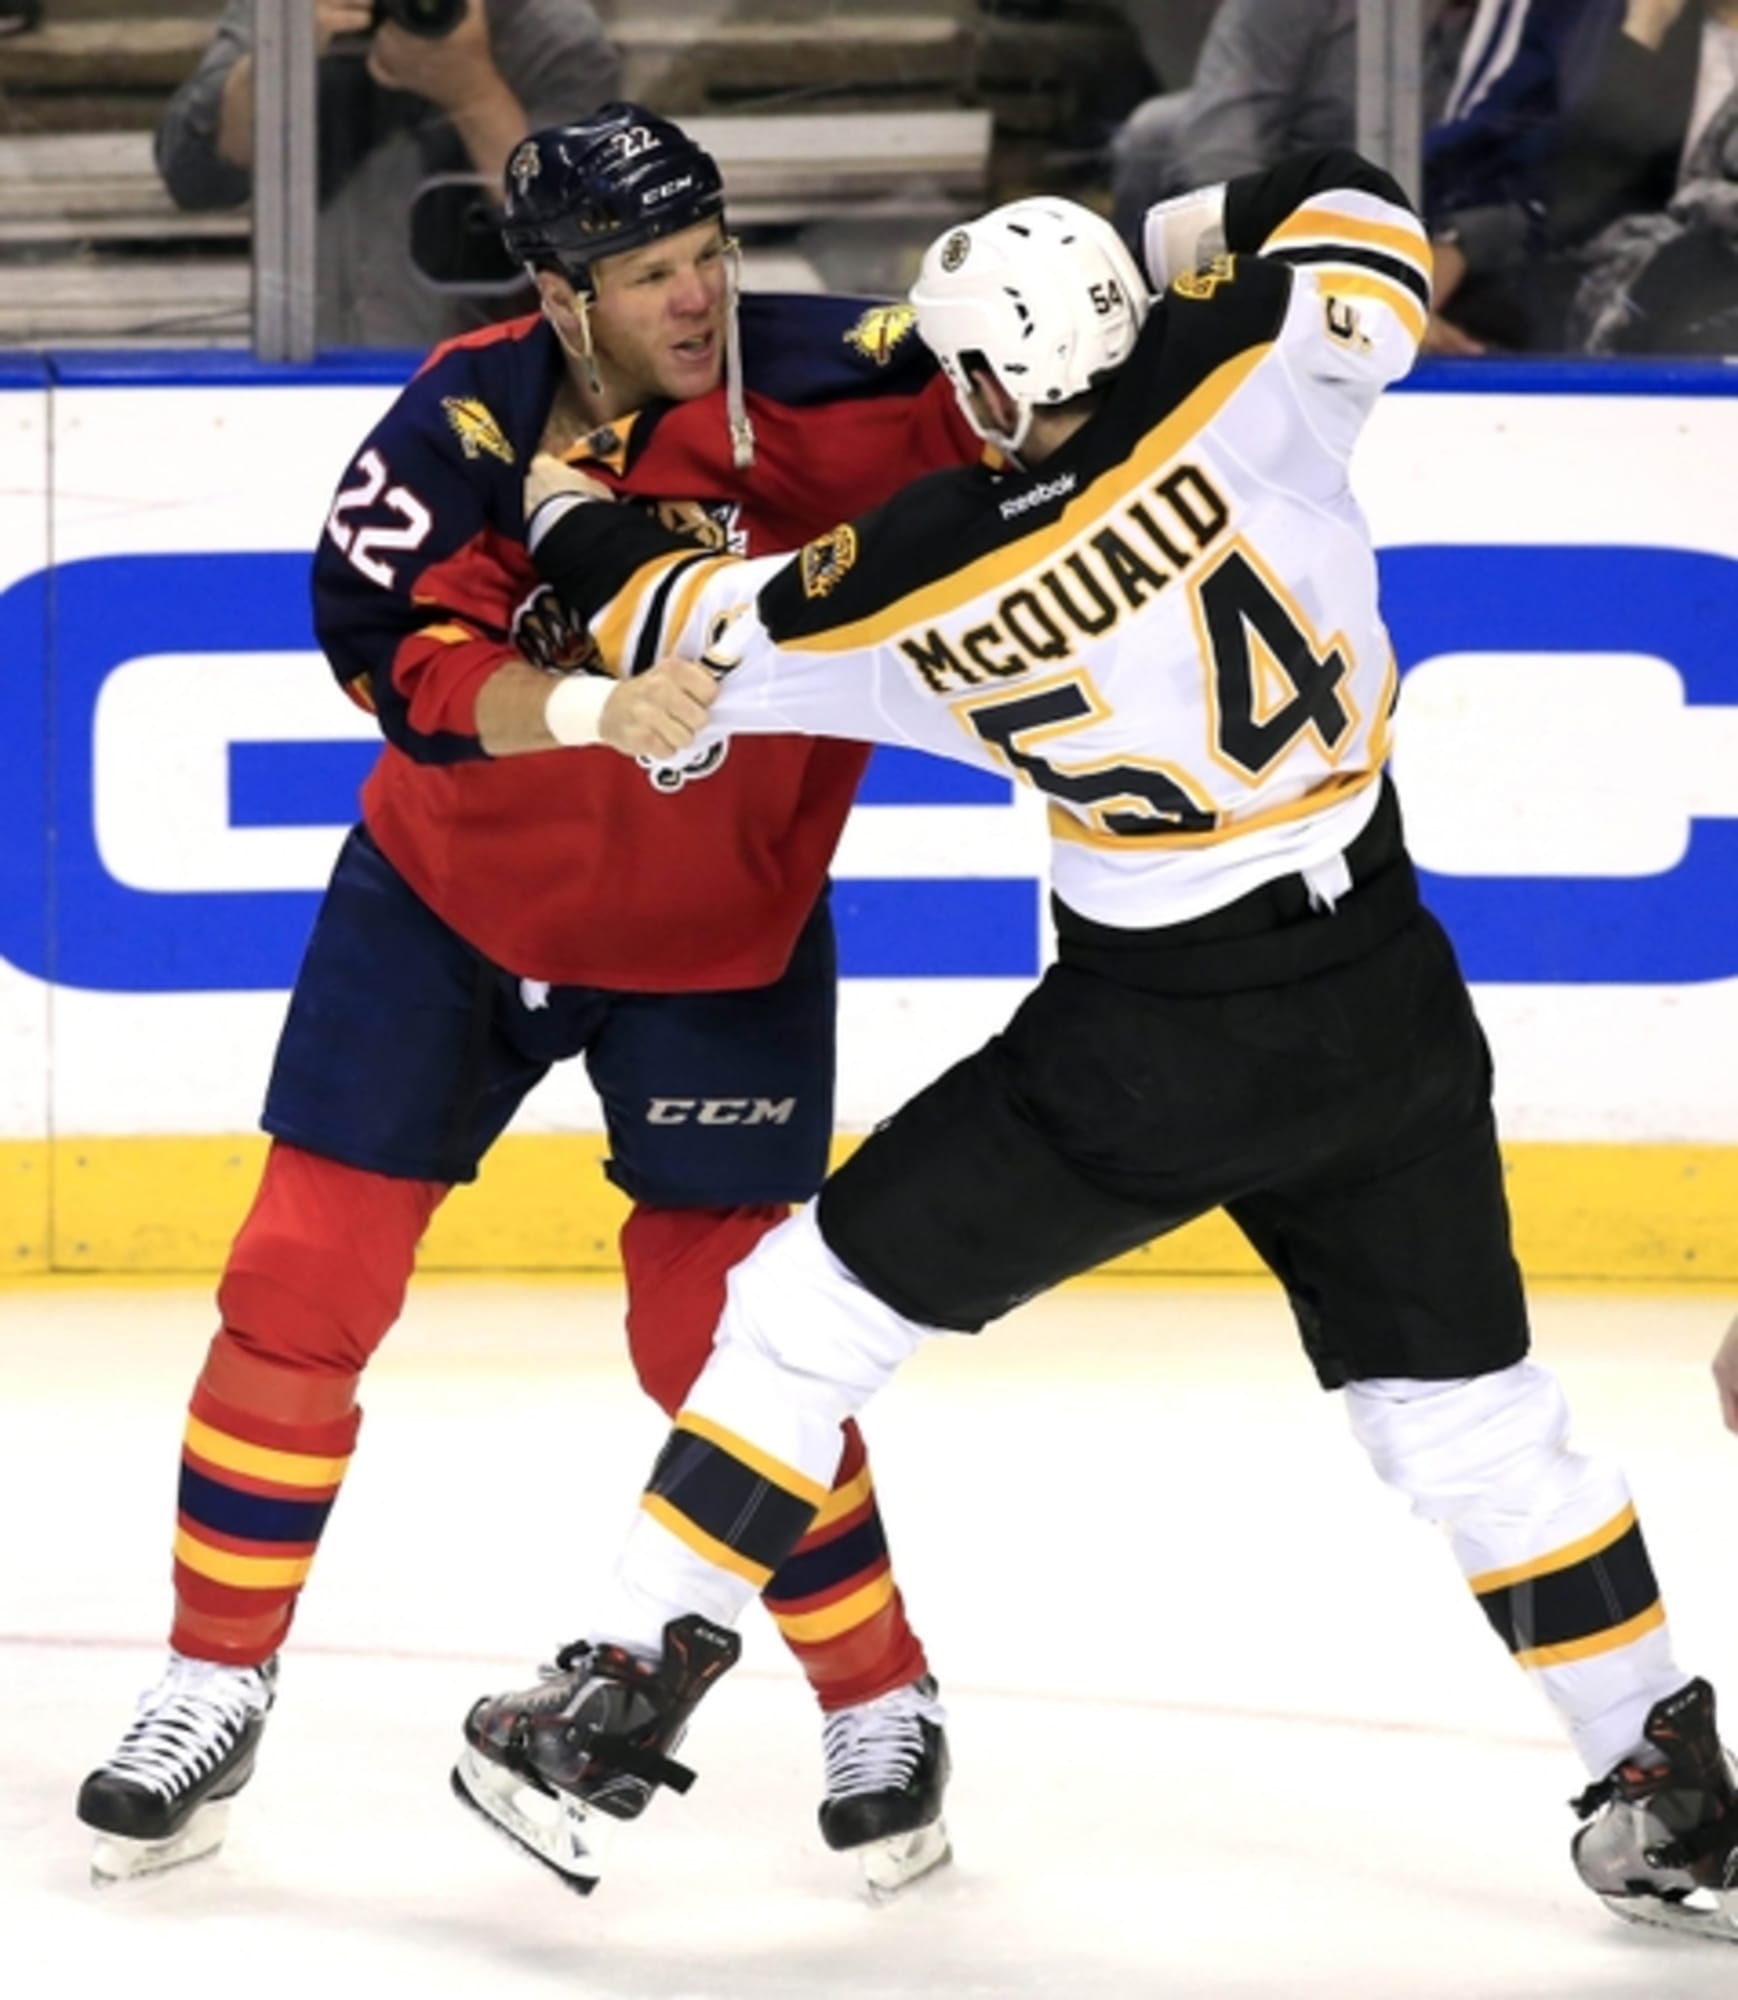 VIDEO: One-on-one with Adam McQuaid of the Boston Bruins - The